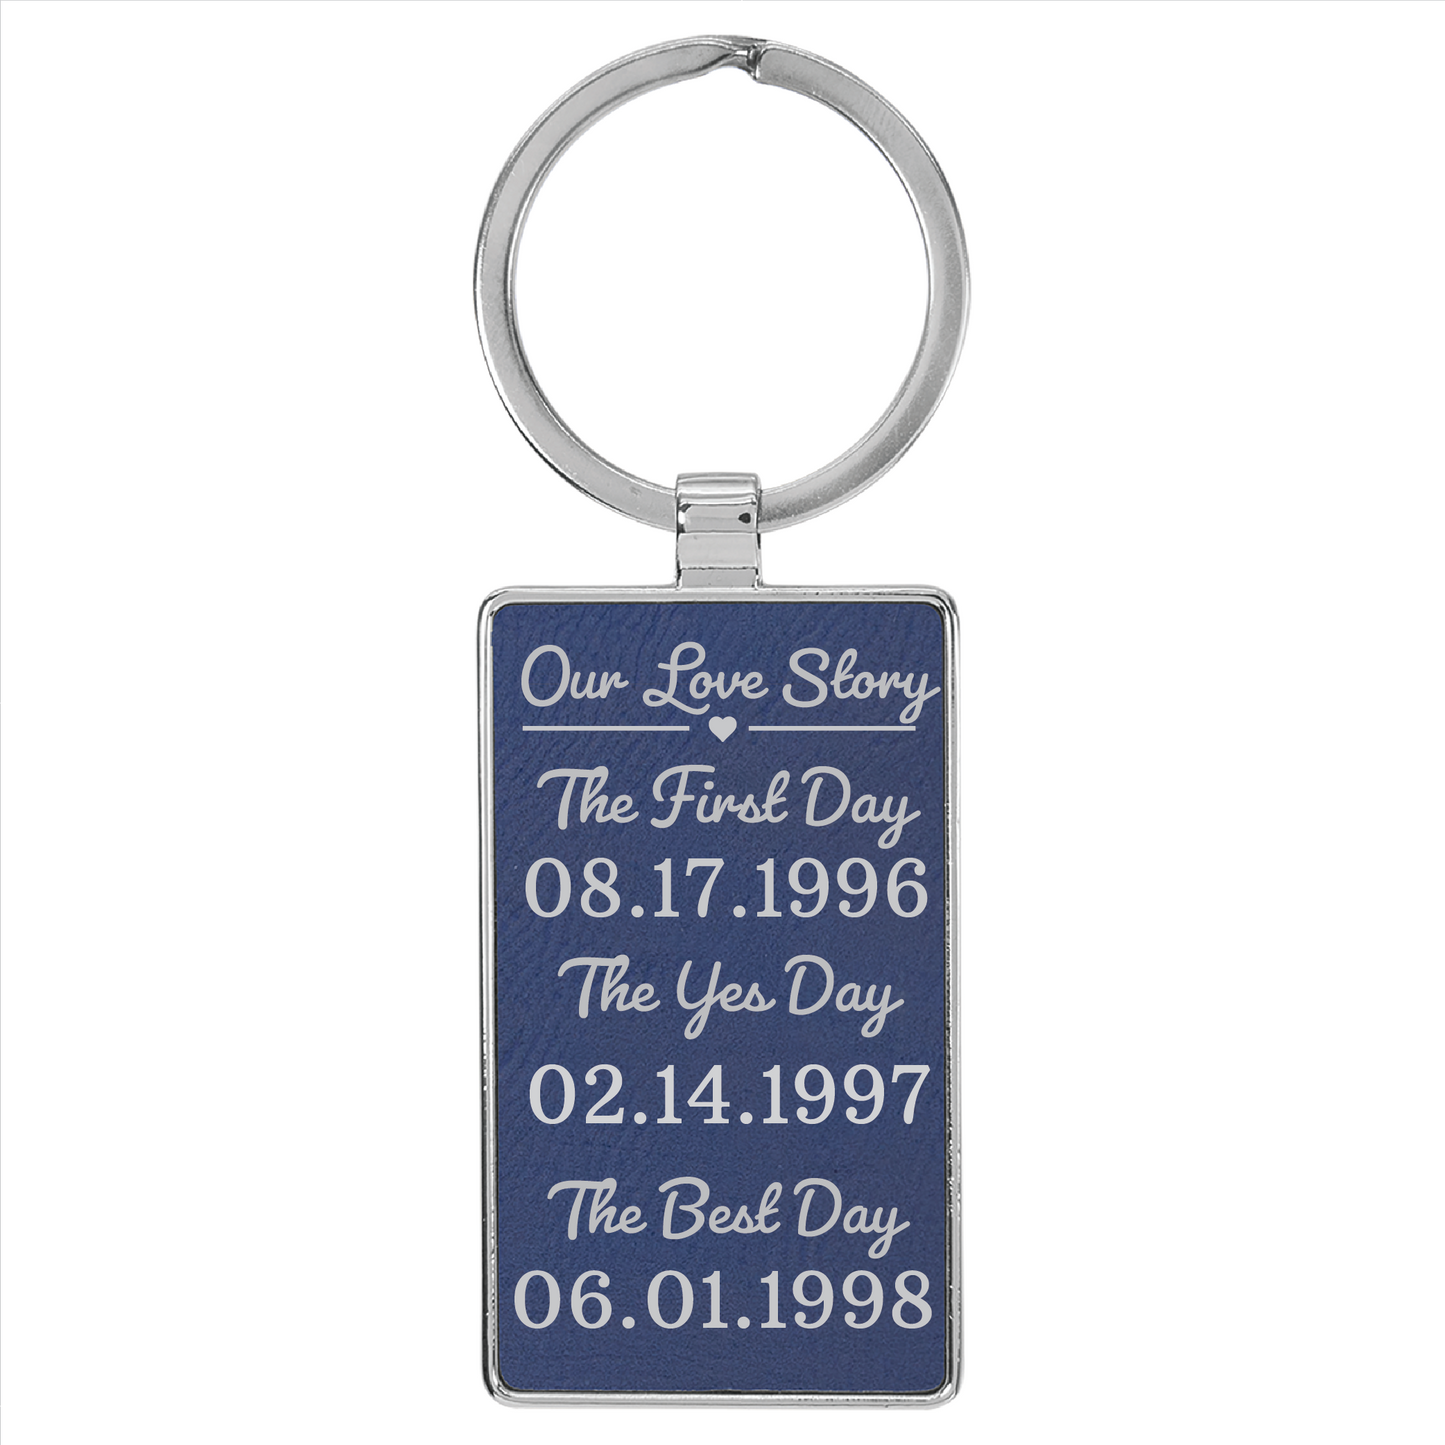 Our Love Story Keychain